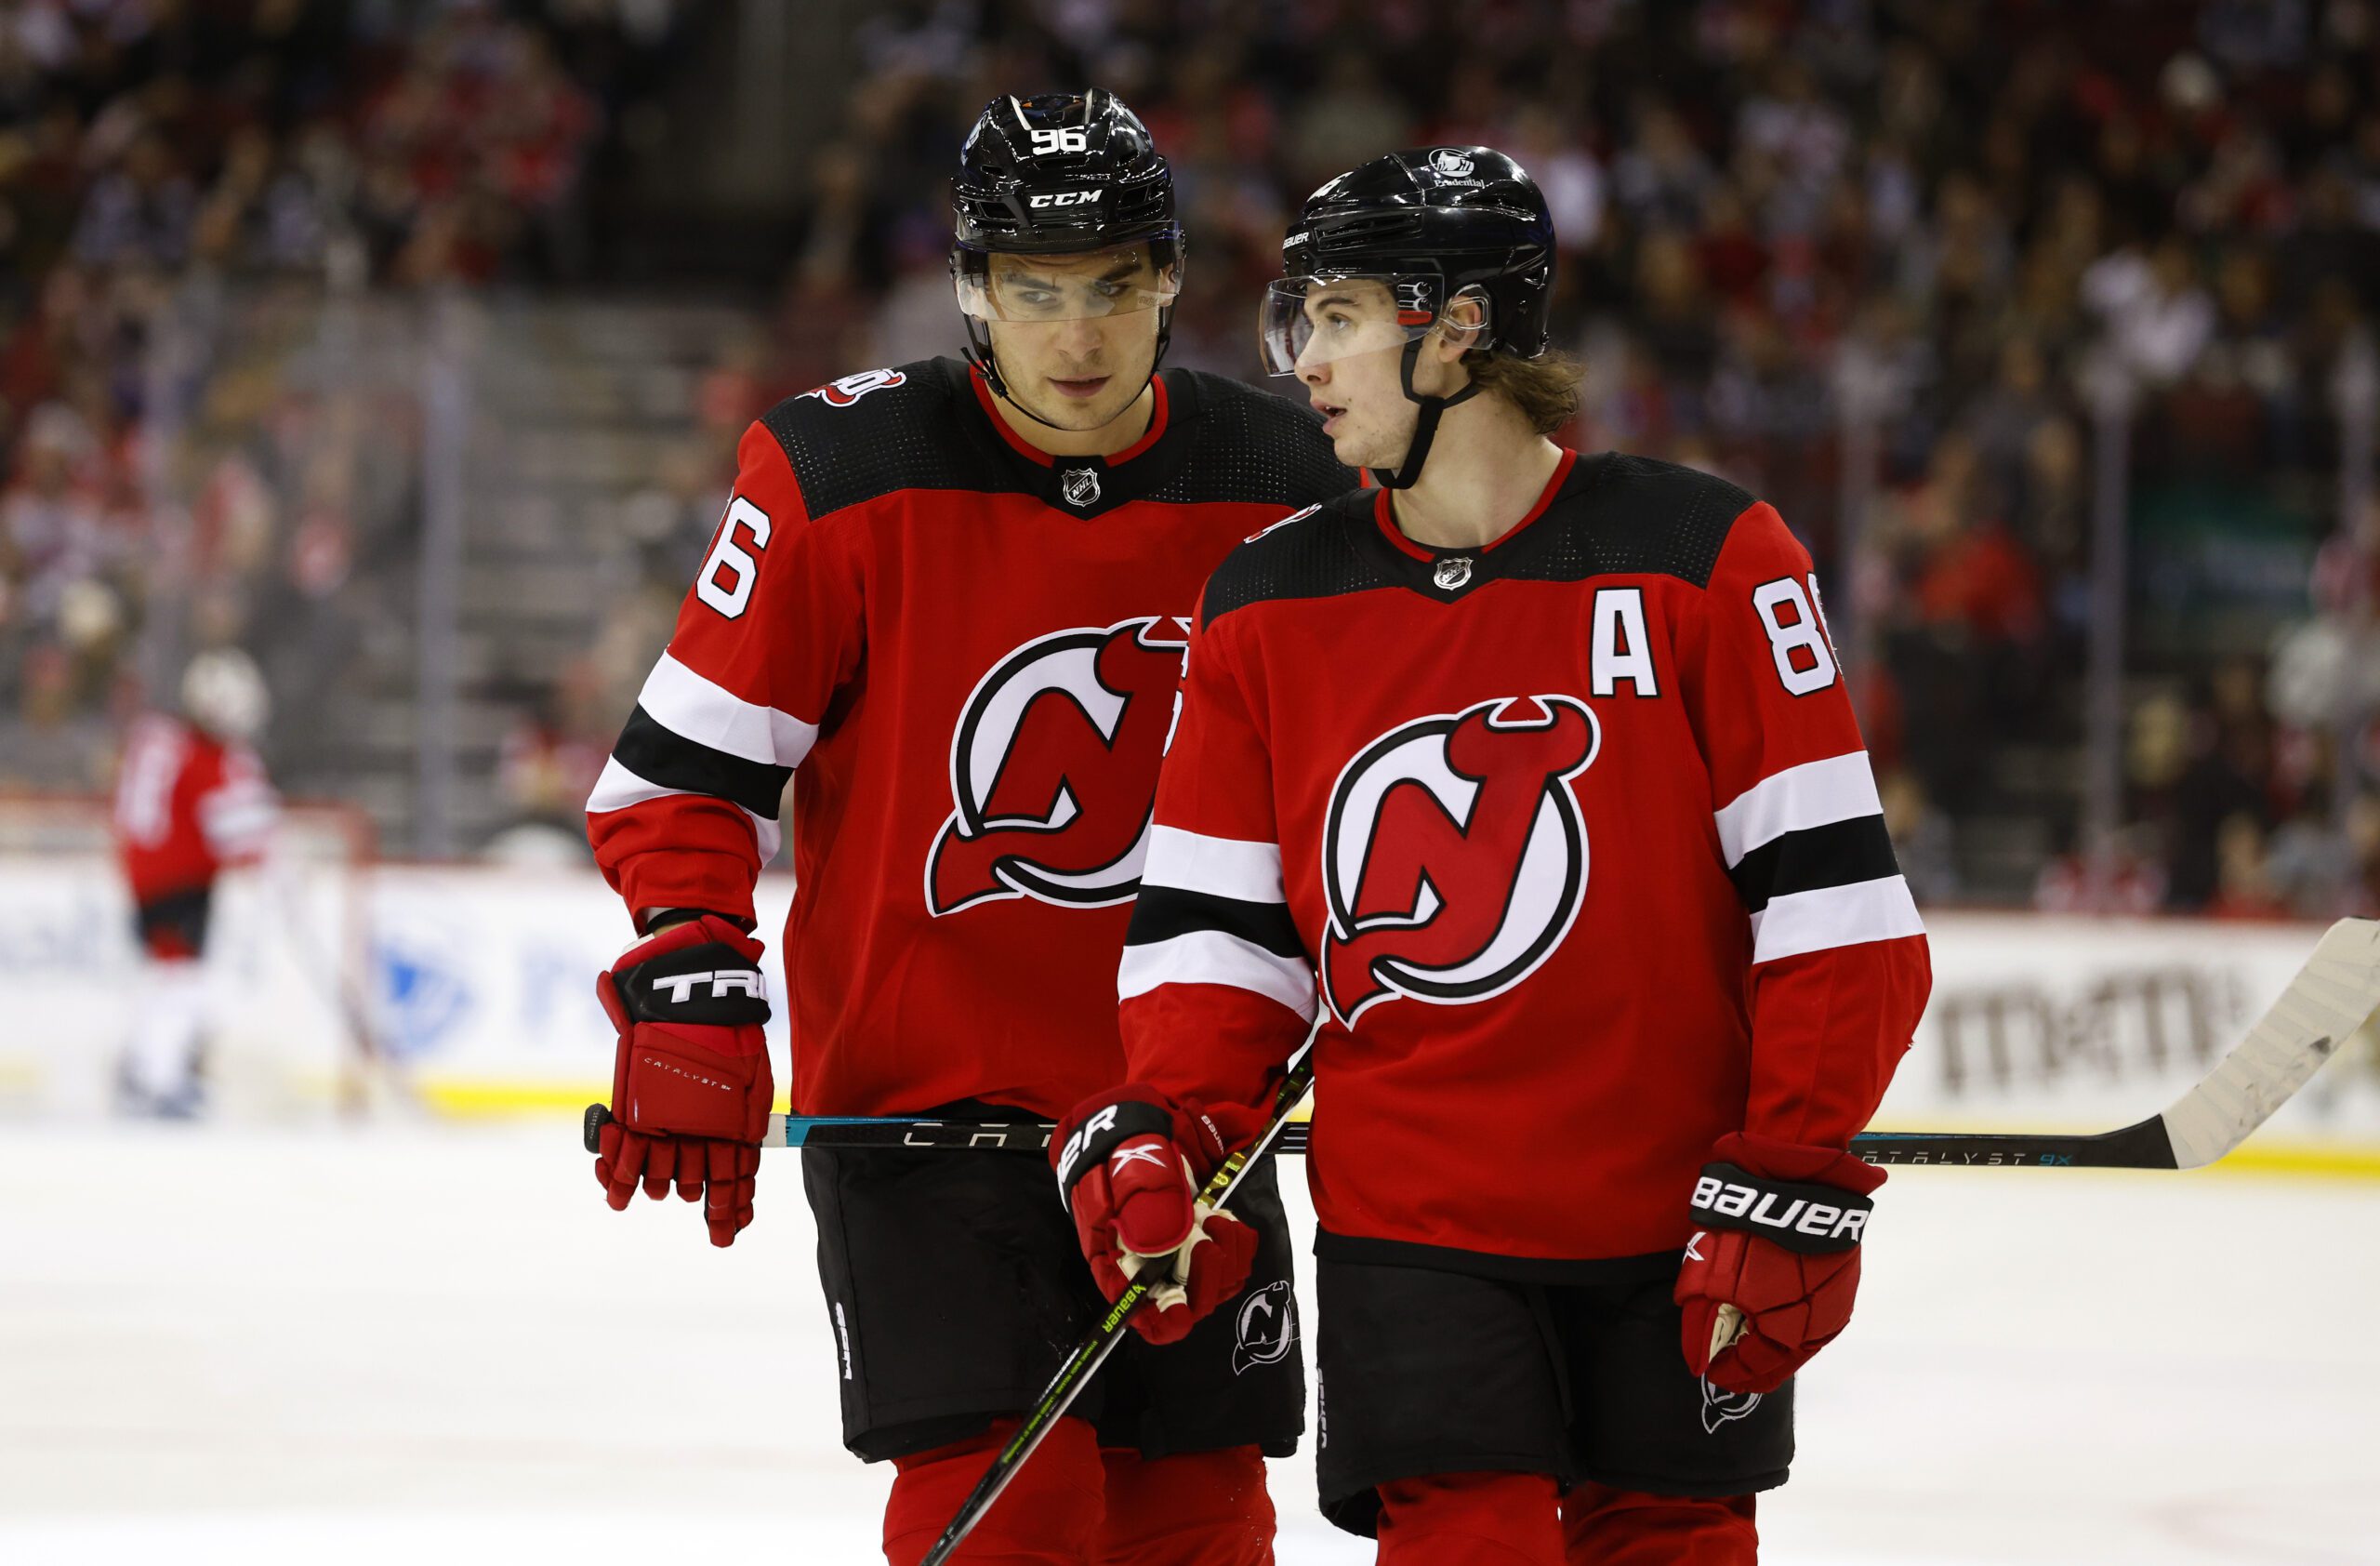 Where Does Devils Forward Timo Meier Belong in the Lineup?